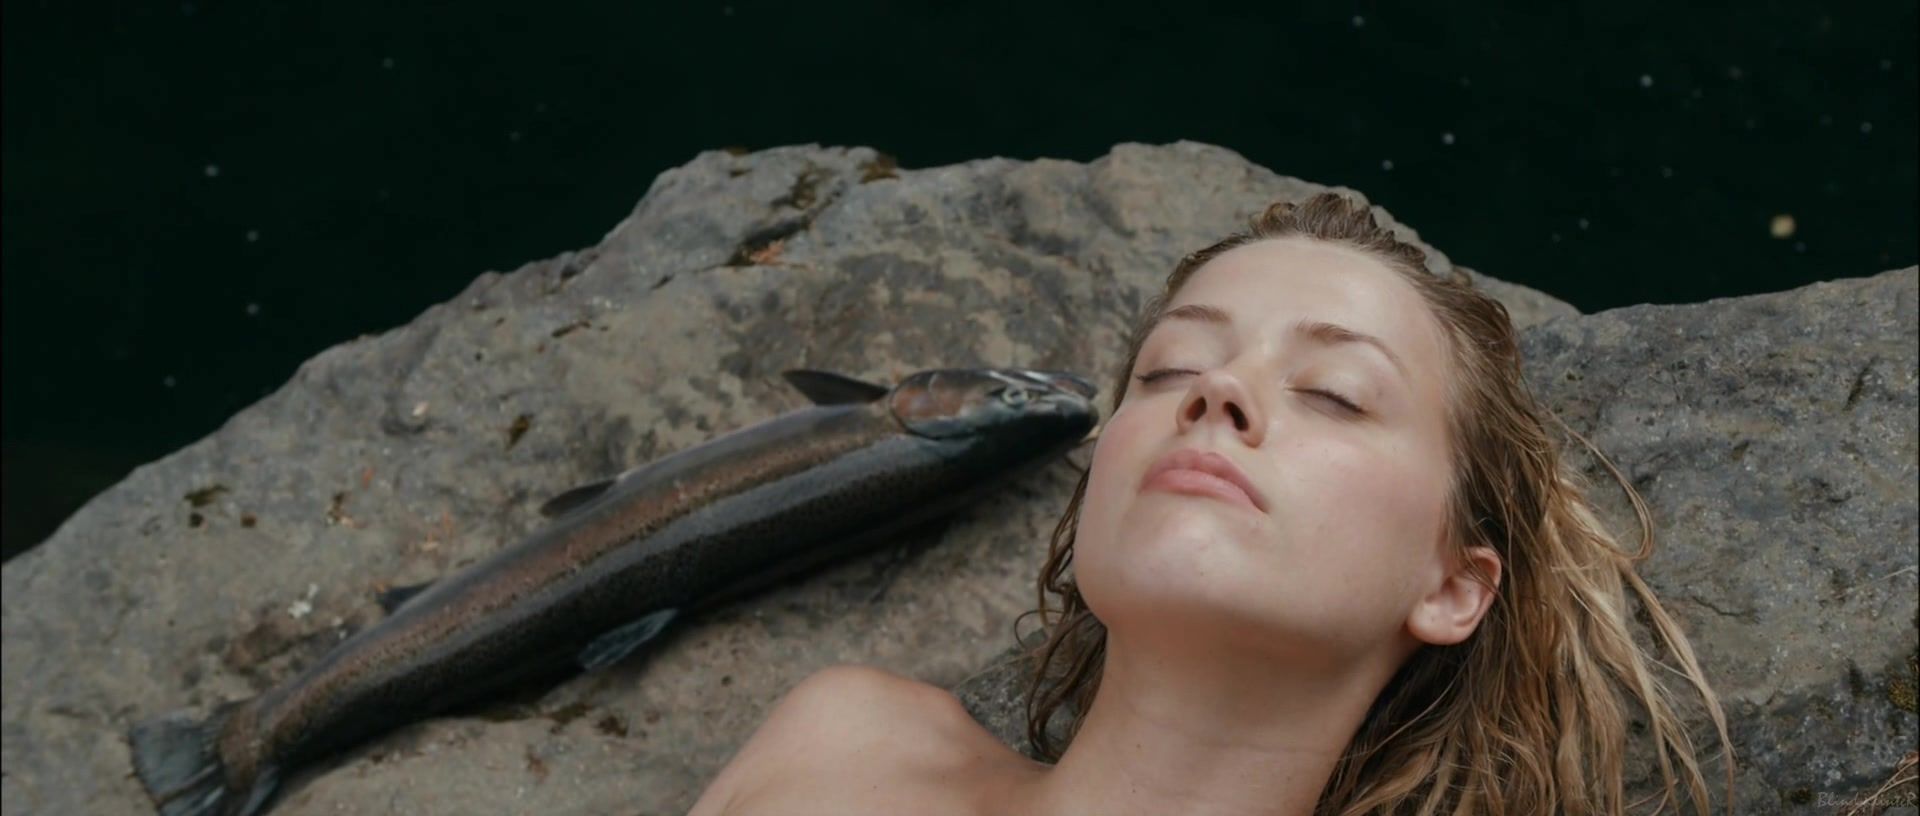 Cocksuckers Sex video Amber Heard nude - The River Why (2010) Sexy